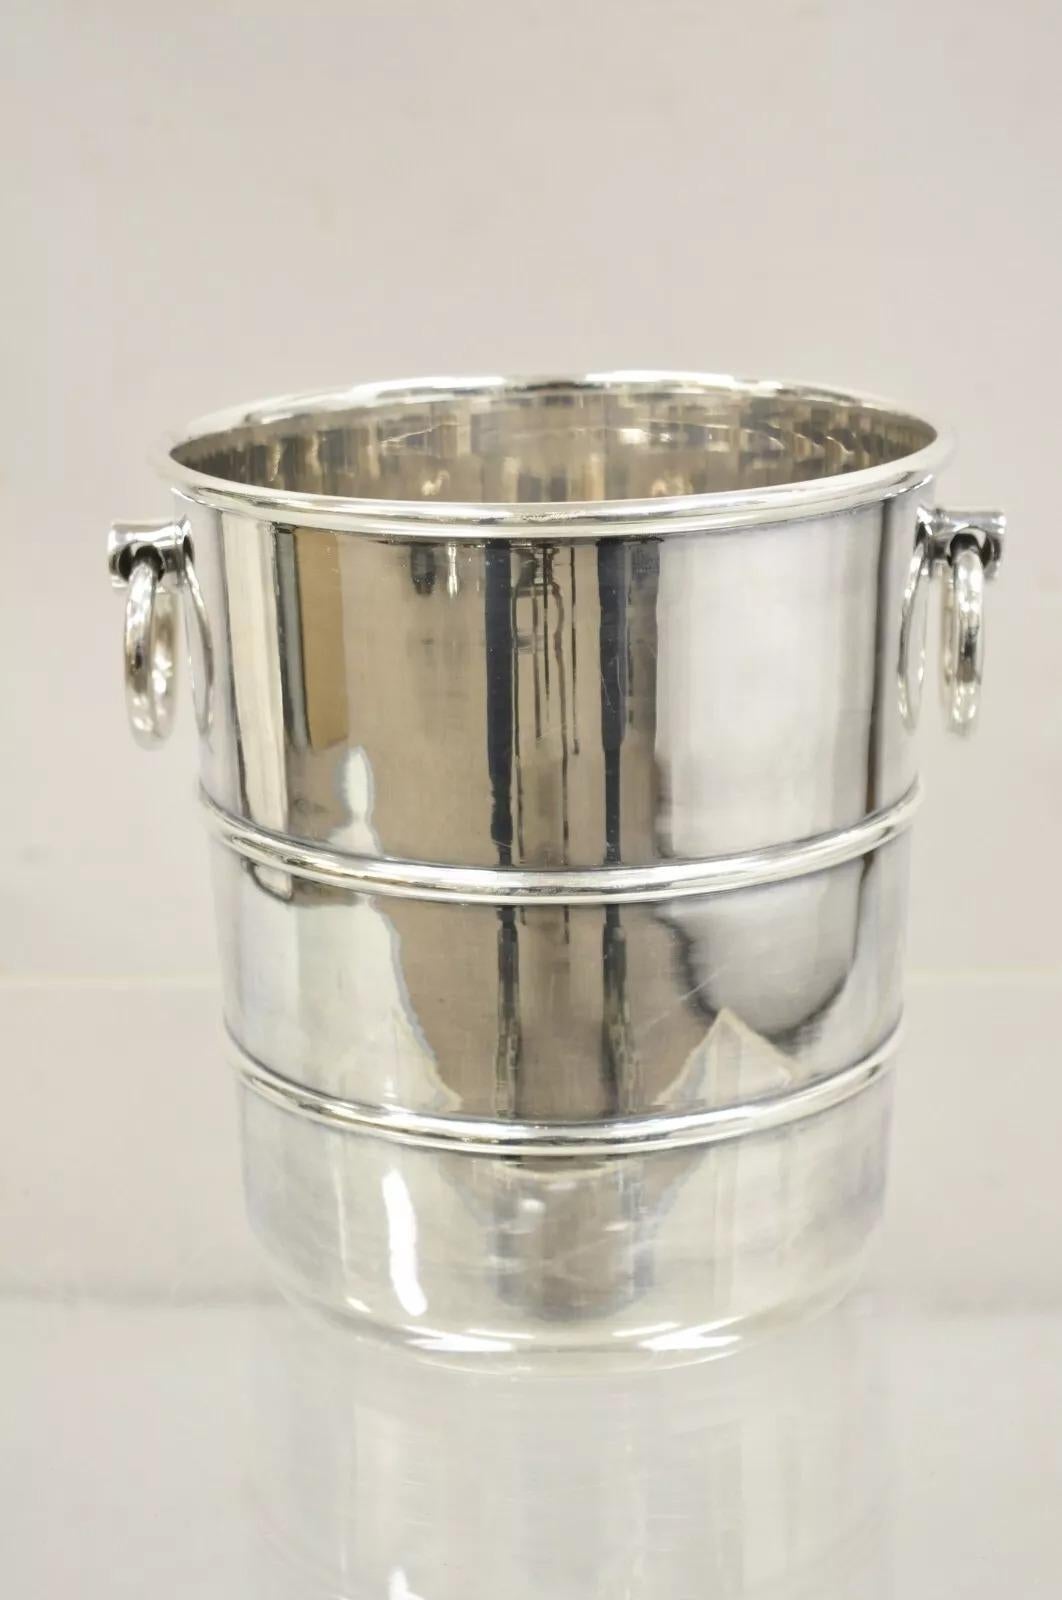 Vintage Hollywood Regency Silver Plated Champagne Chiller Ice Bucket with Drop Ring Handles. Circa Mid 20th Century. Measurements: 8